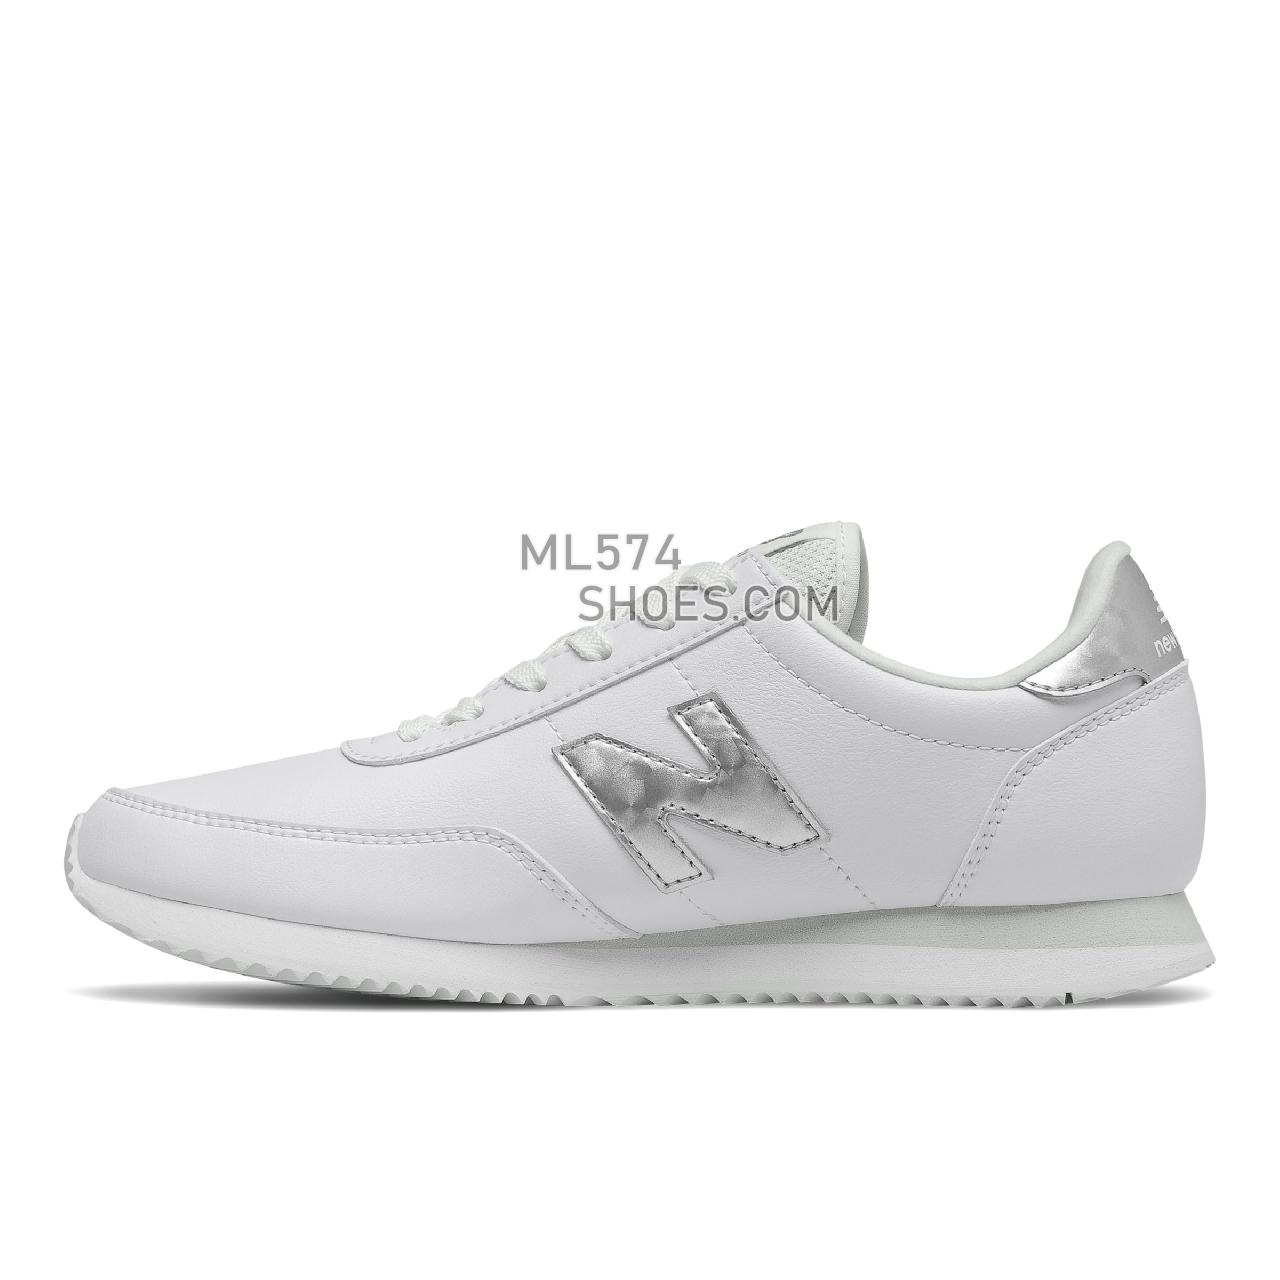 New Balance 720 - Women's Classic Sneakers - White with Silver - WL720MA1